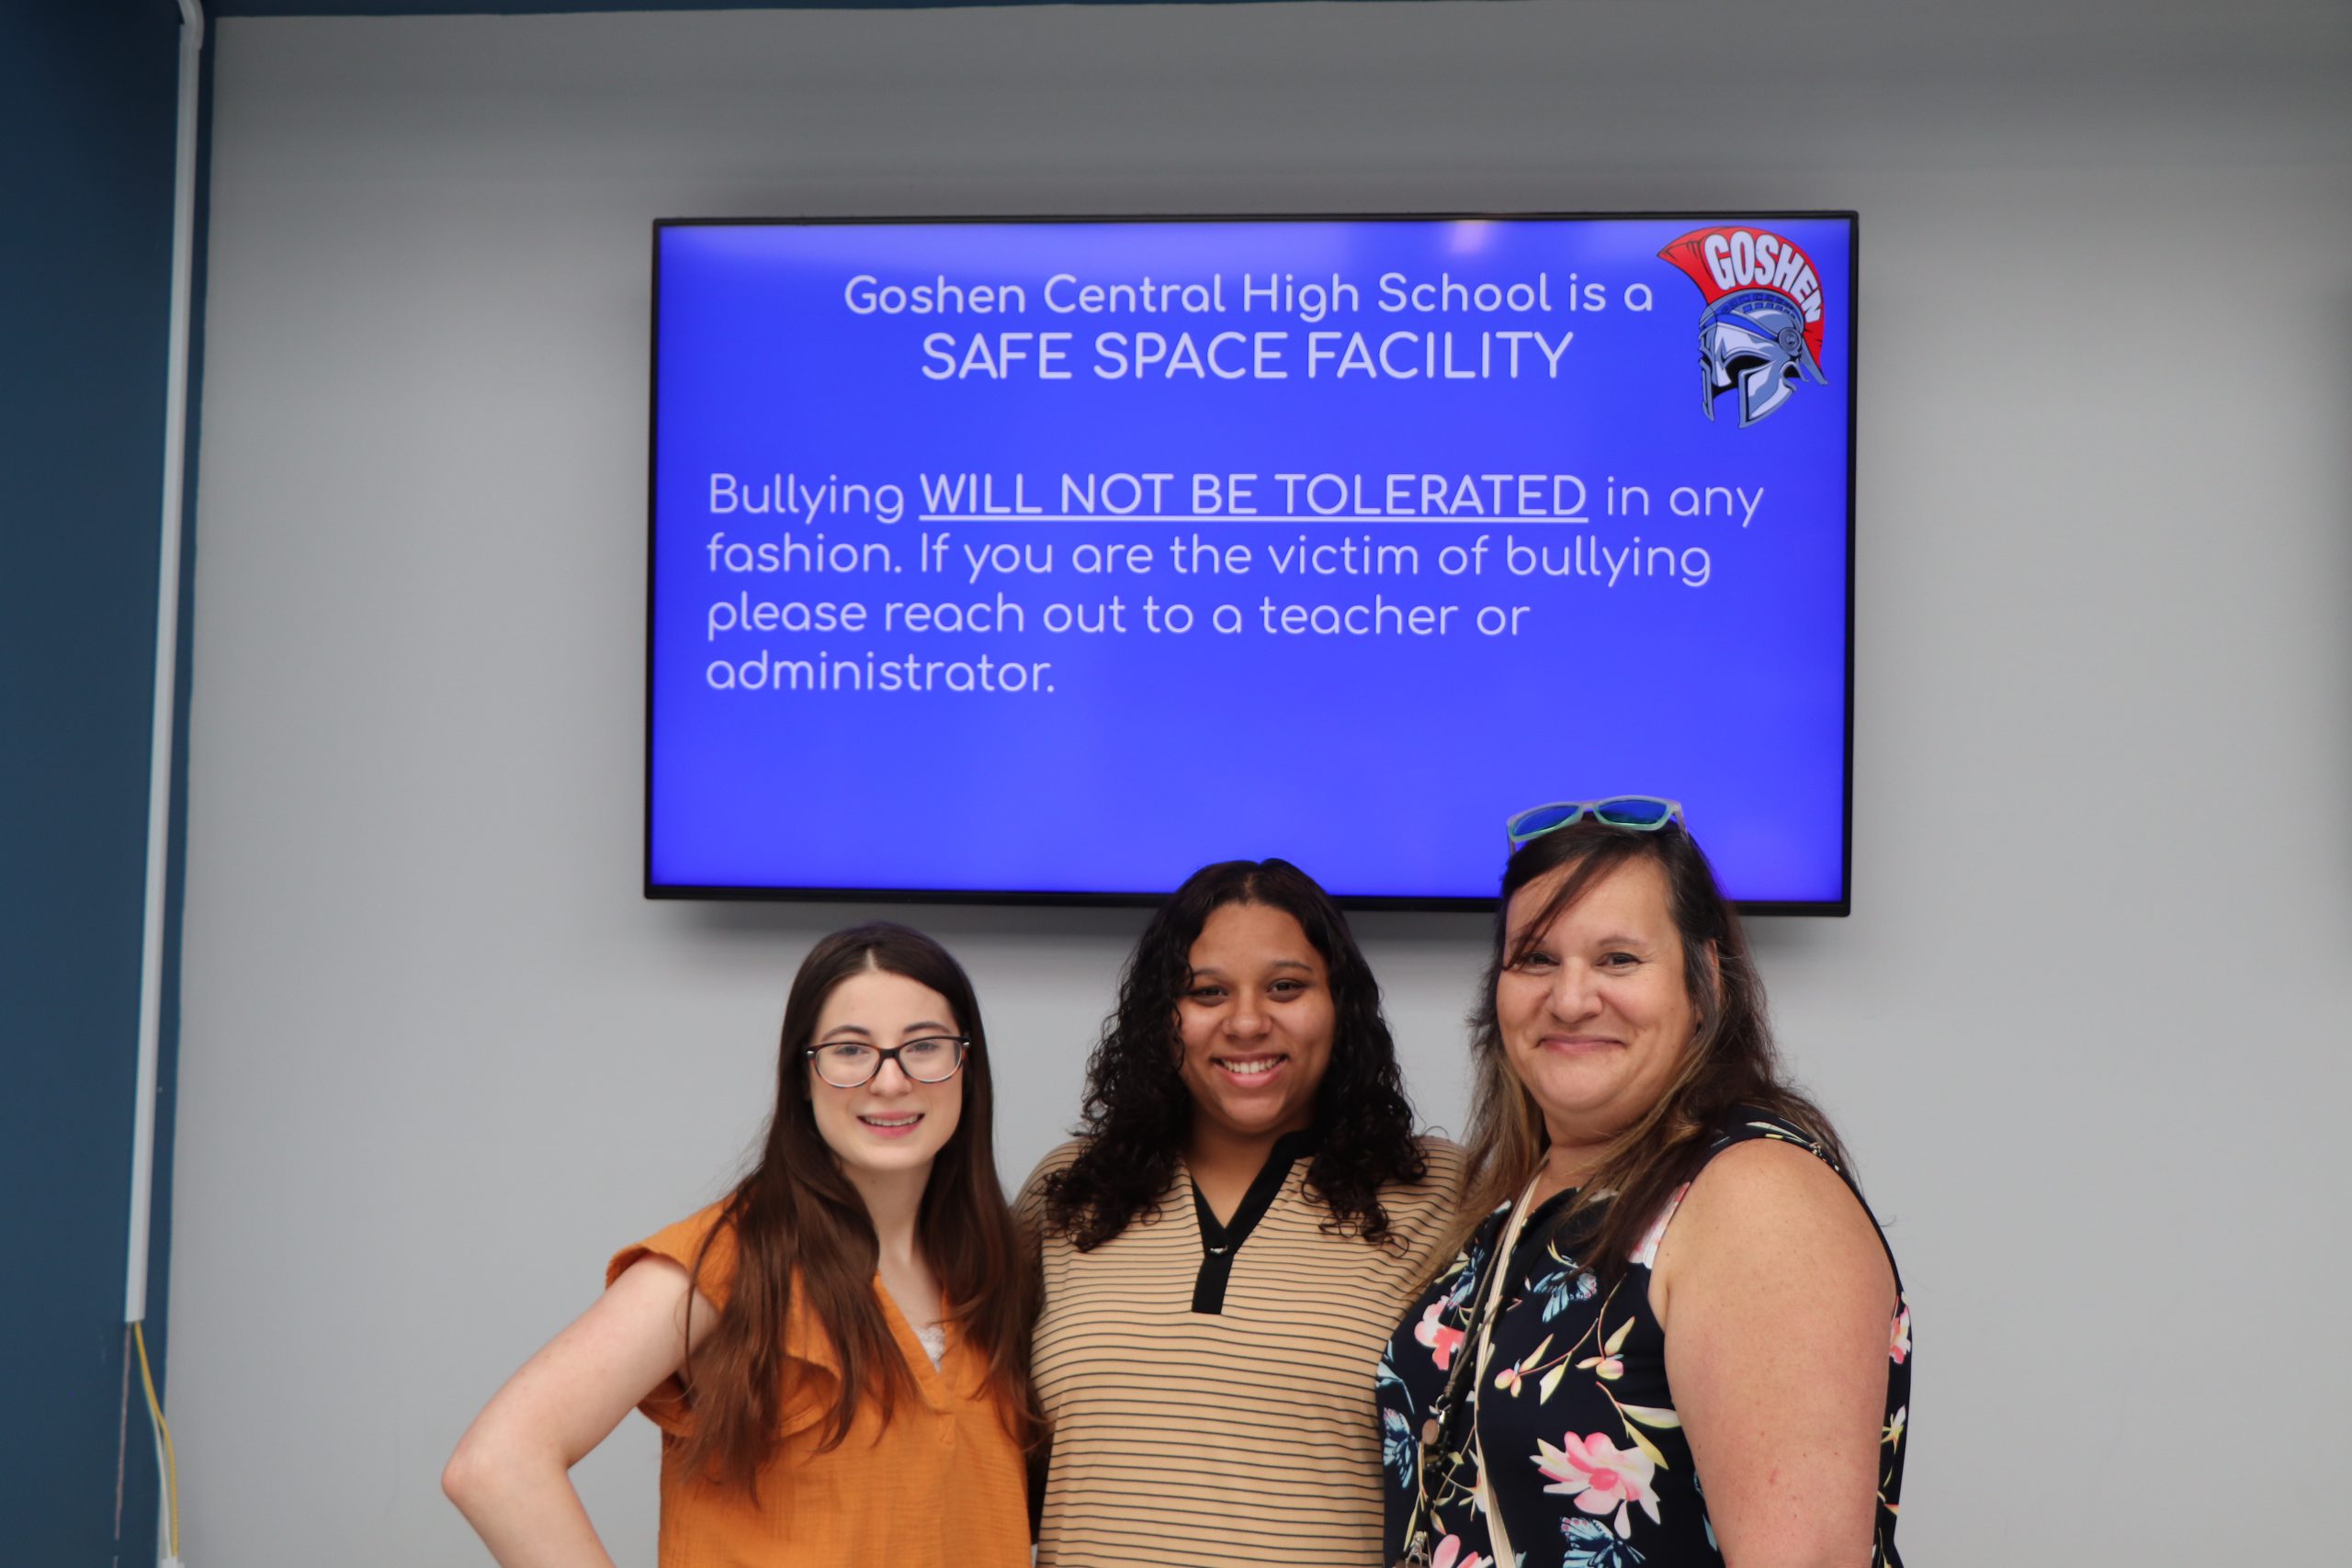 Three women stand together smiling in front of a screen that says "Goshen Central High School is a Safe Space Facility"